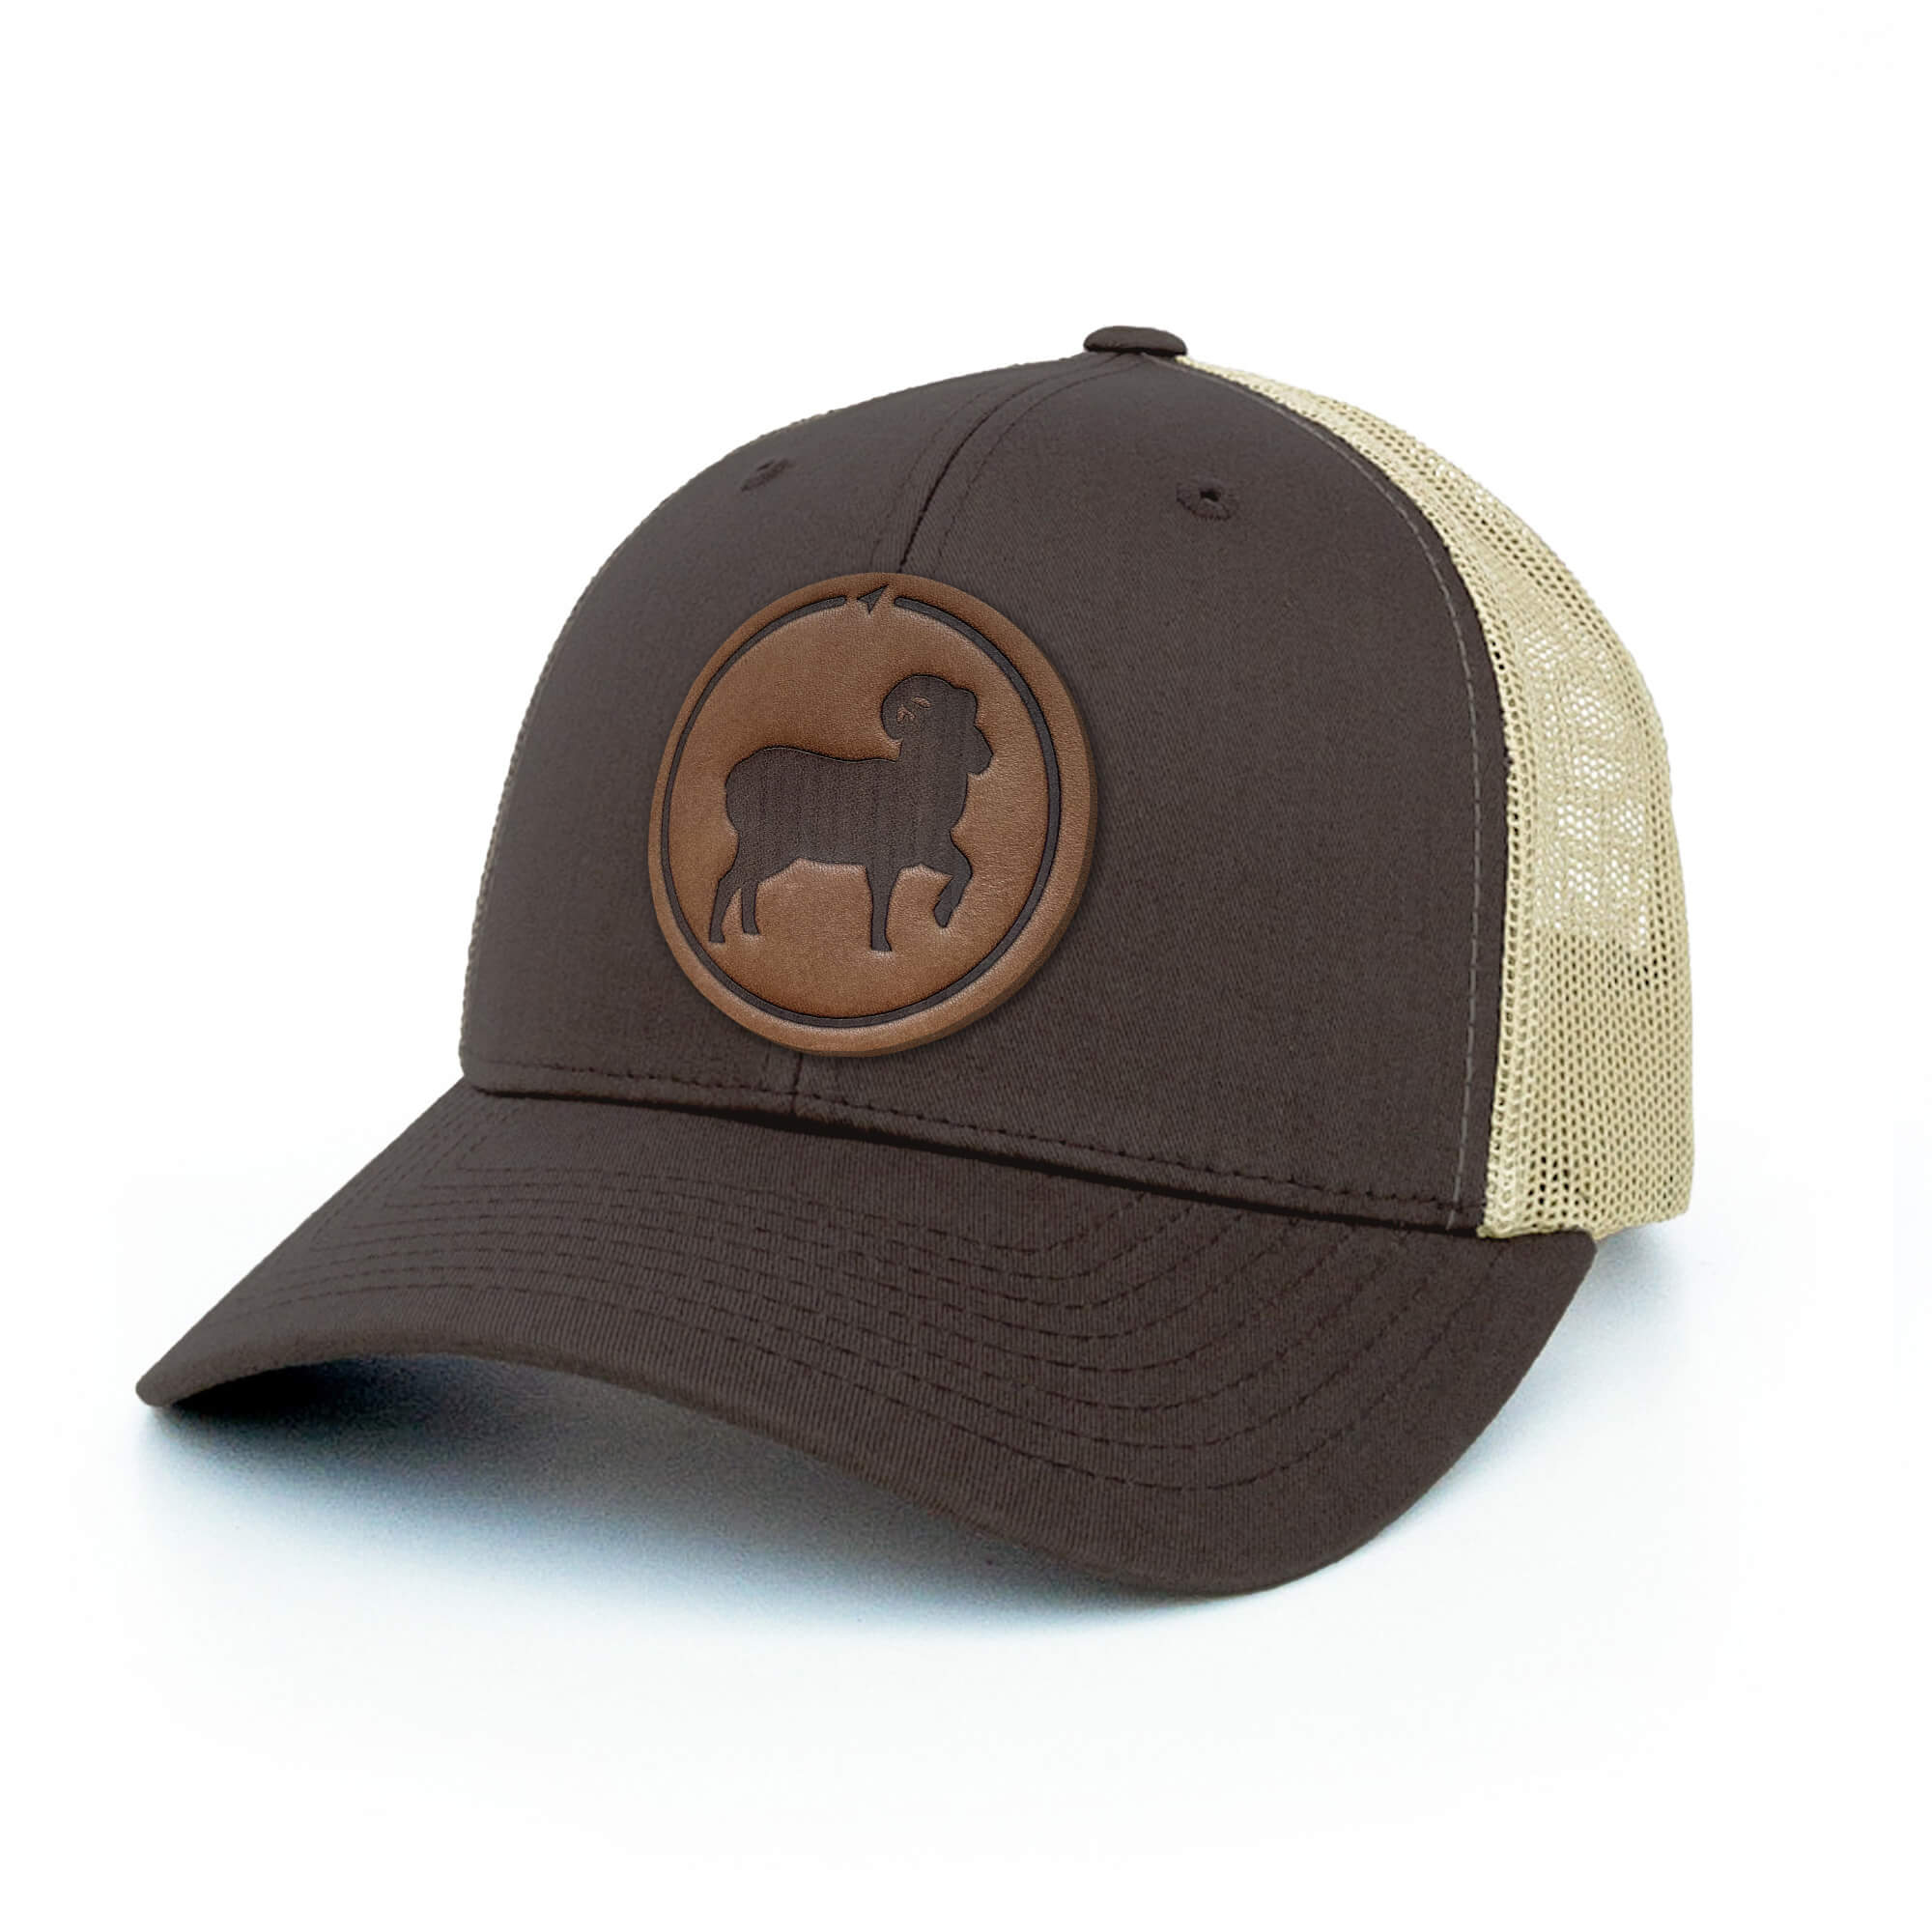 Brown and khaki trucker hat with full-grain leather patch of a Bighorn Sheep | BLACK-004-002, CHARC-004-002, NAVY-004-002, HGREY-004-002, MOSS-004-002, BROWN-004-002